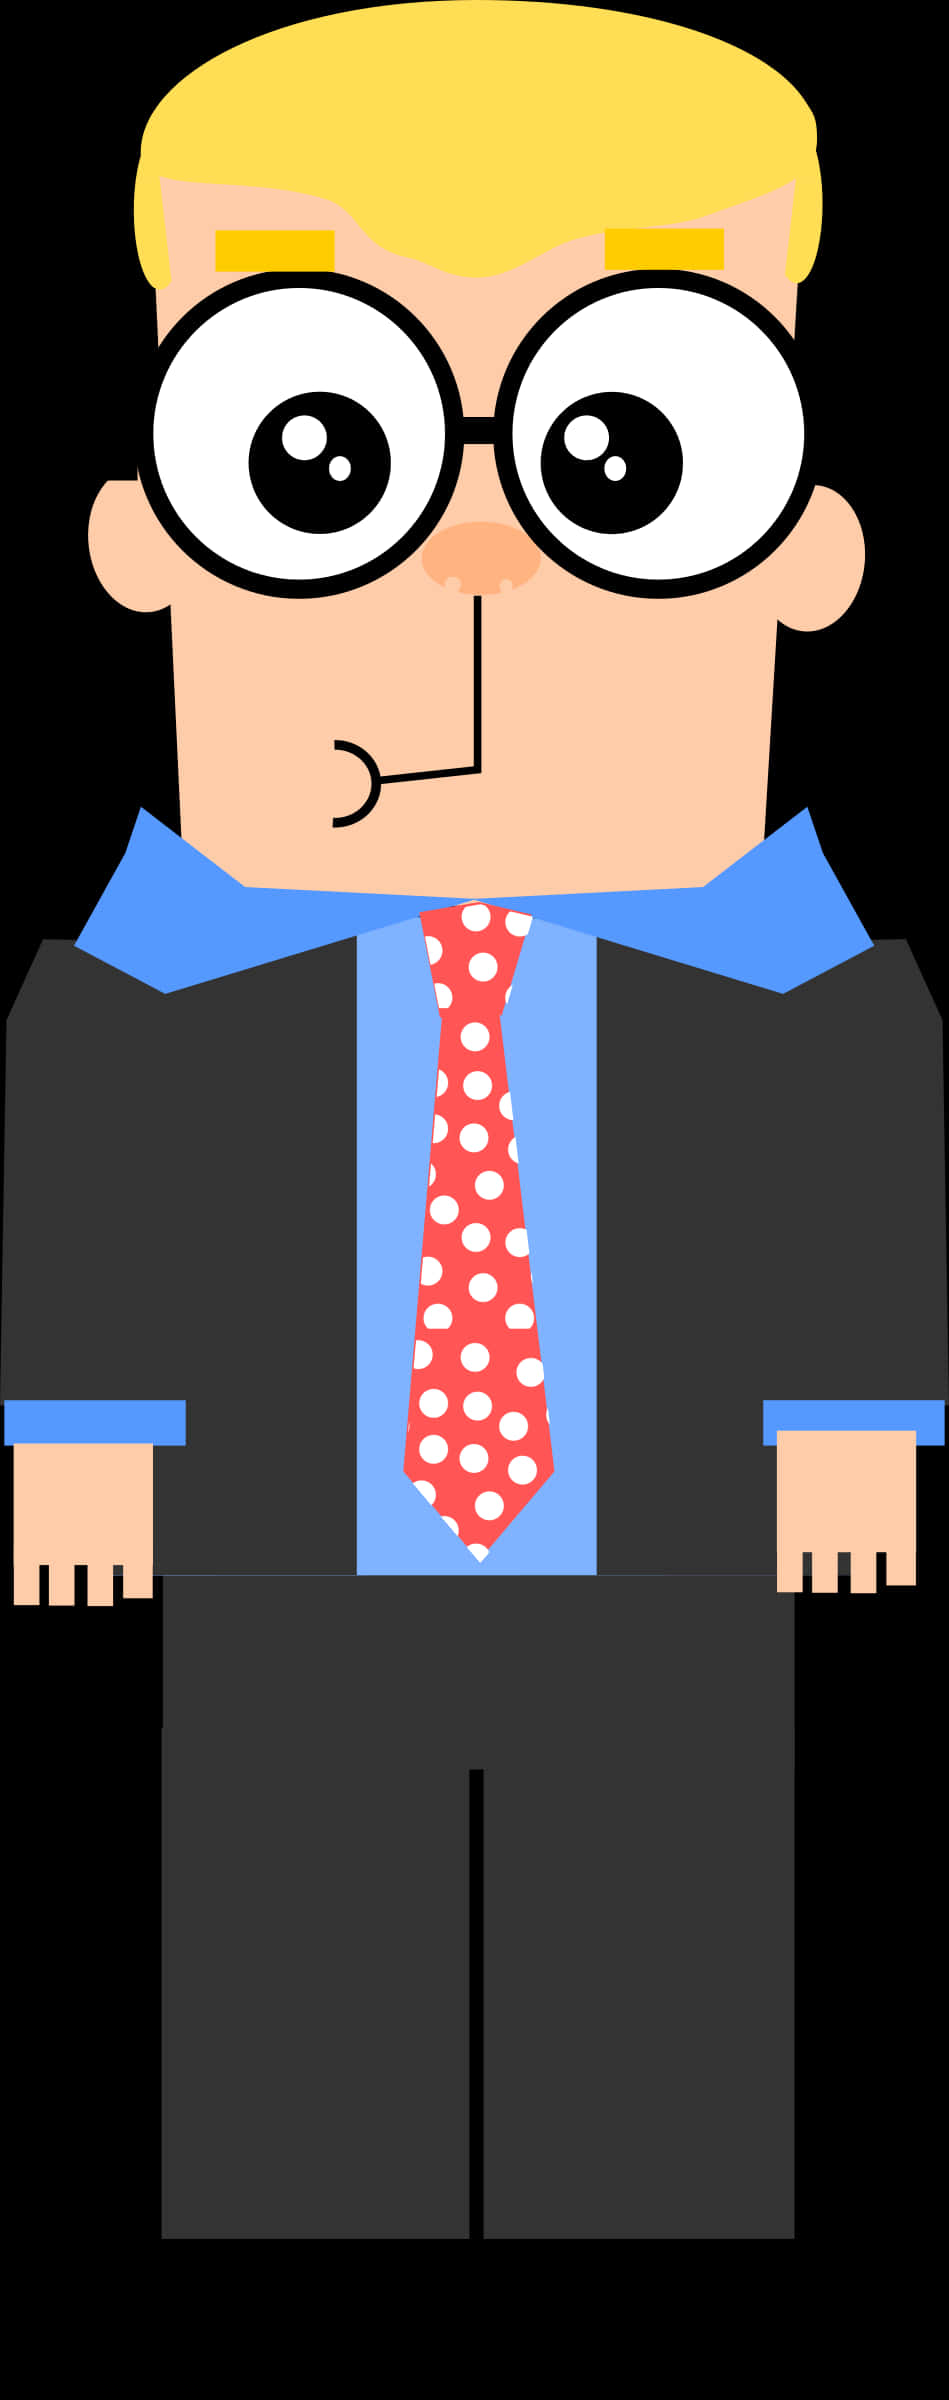 A Cartoon Character Wearing A Suit And Tie